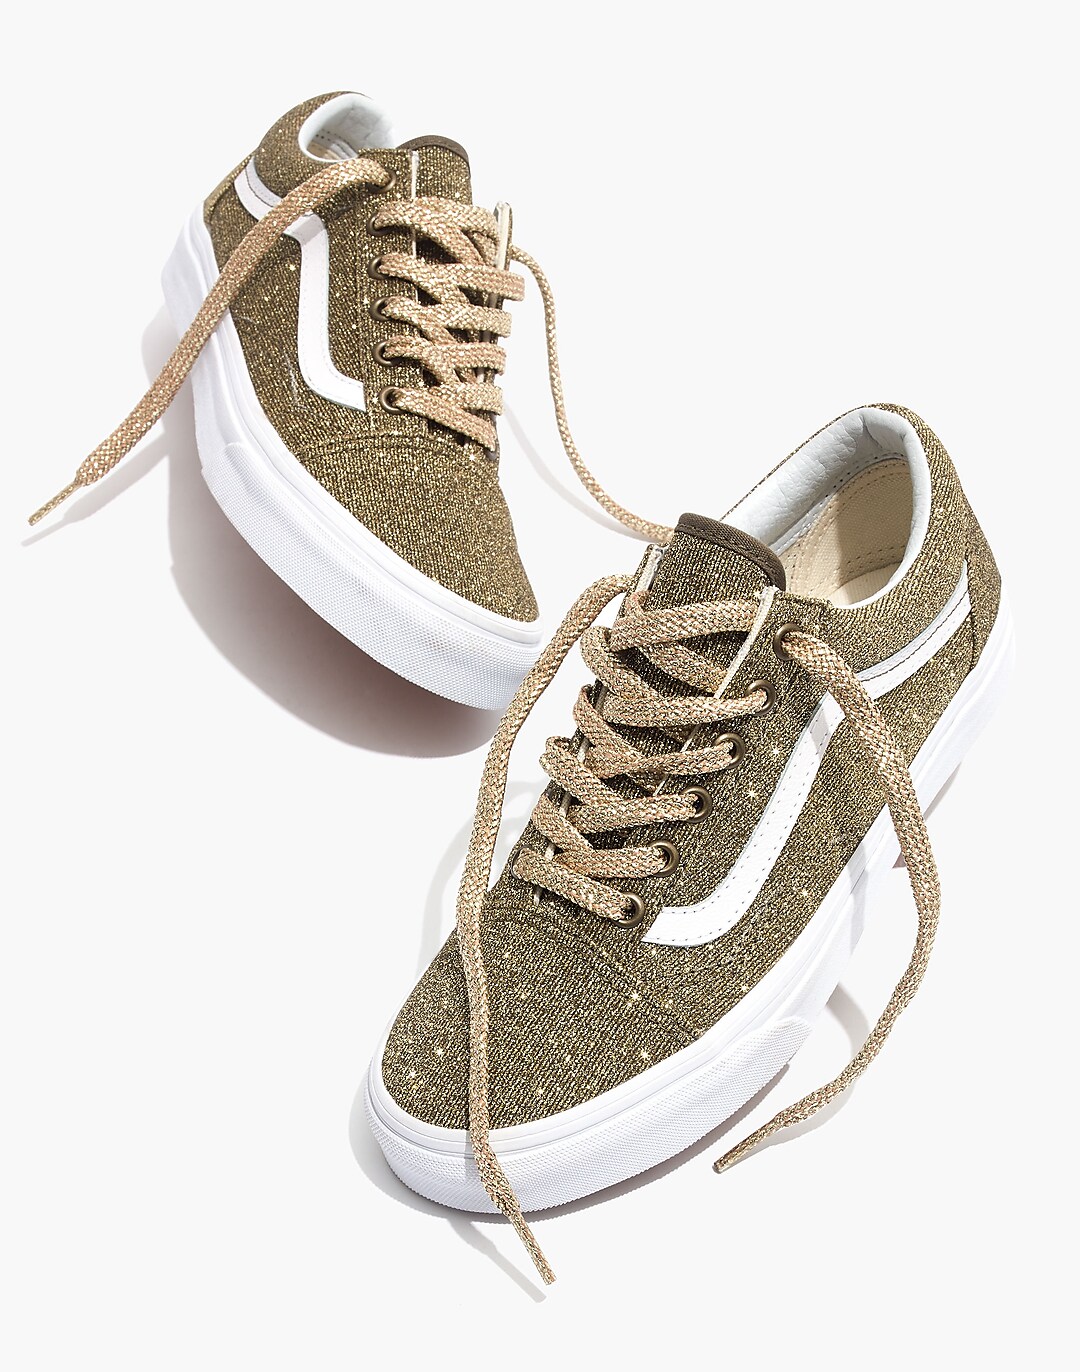 Old Vans® Unisex in Lace-Up Gold Skool Glitter Sneakers